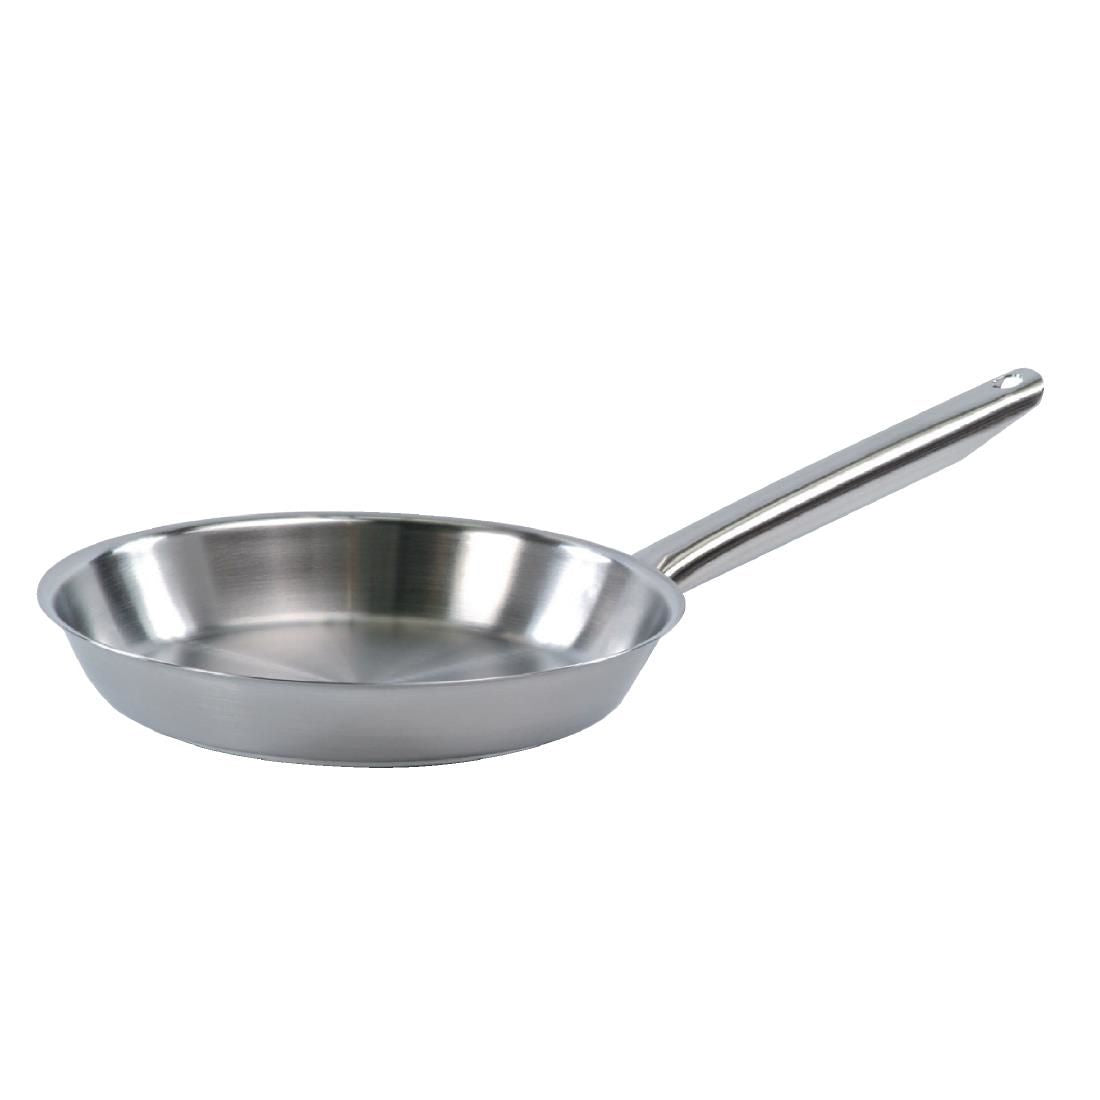 Bourgeat Tradition Plus Induction Frying Pan 240mm JD Catering Equipment Solutions Ltd